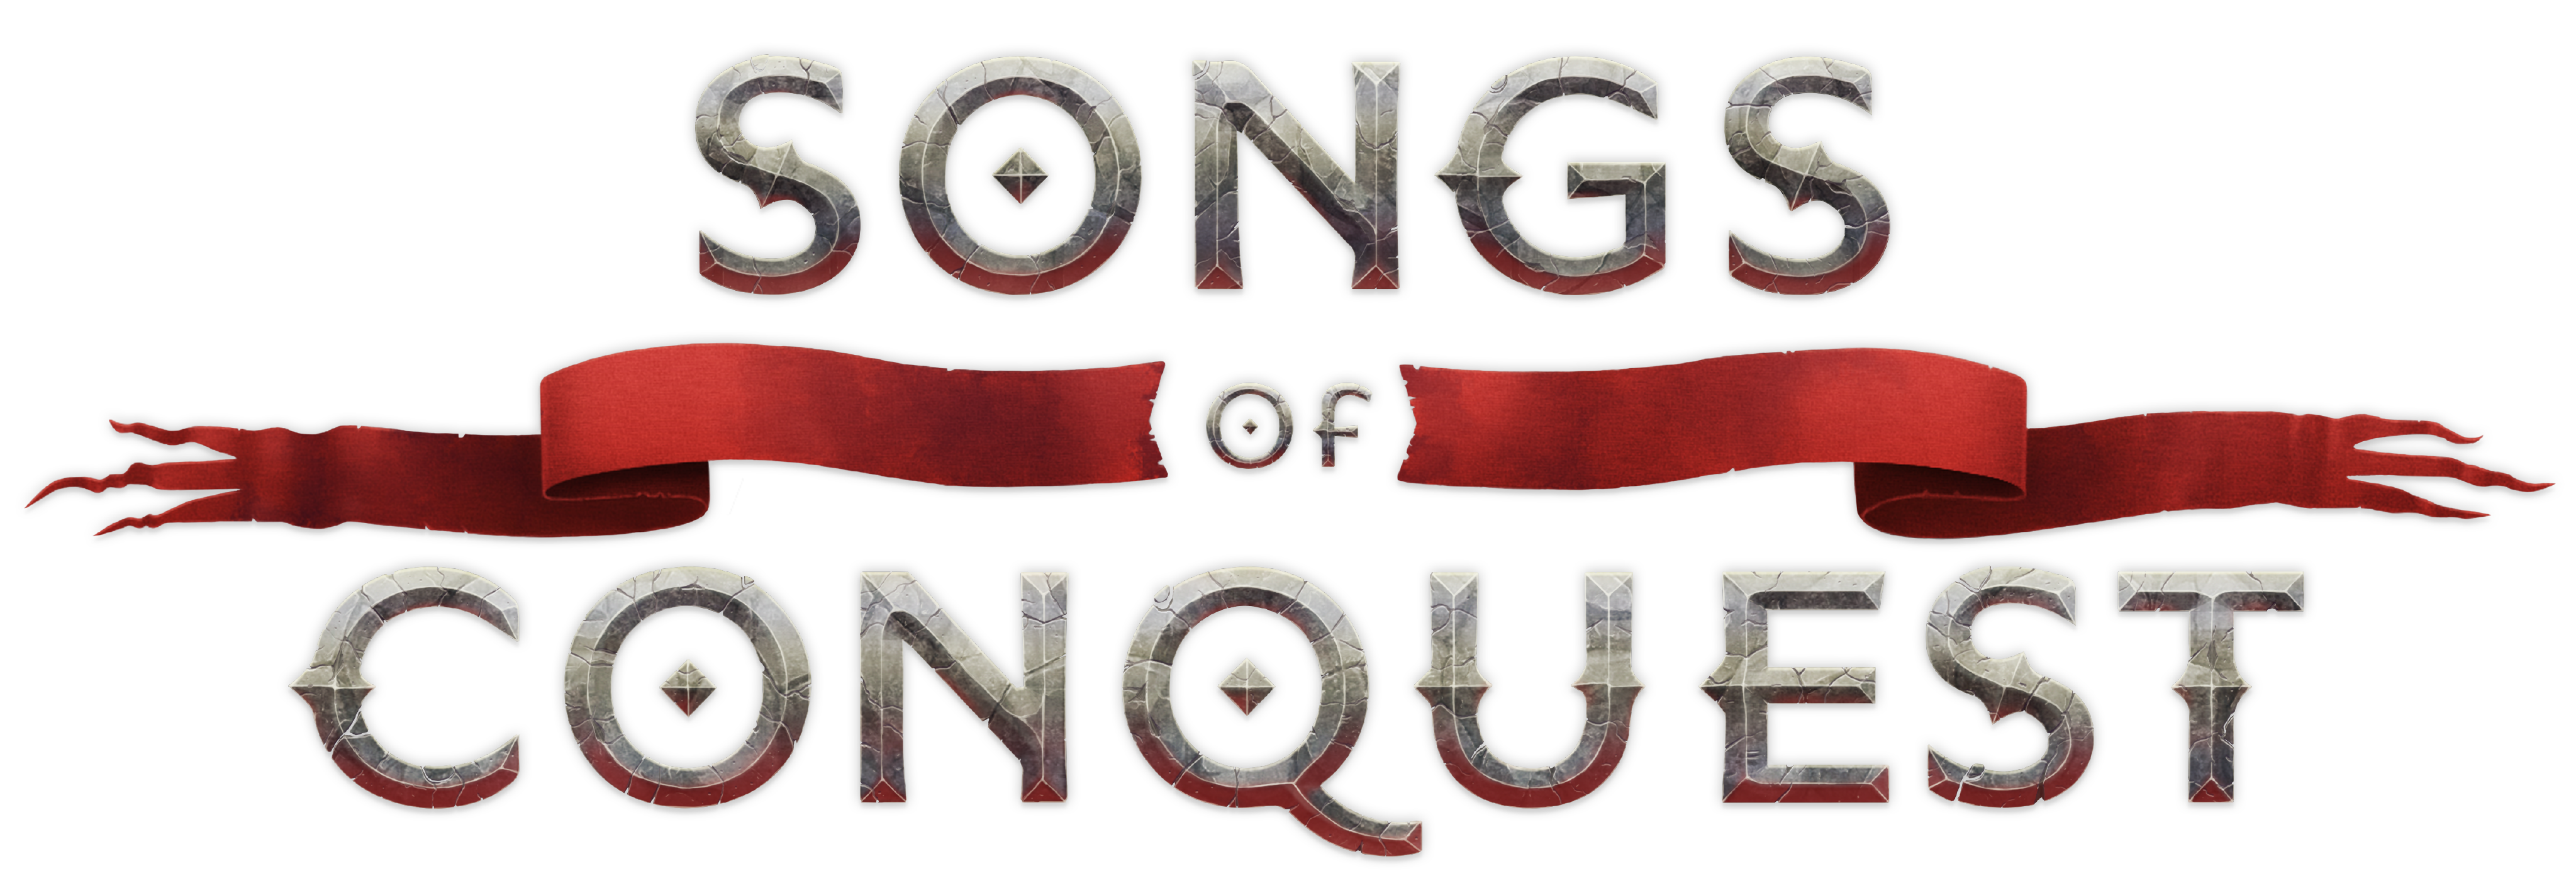 SongsOfConquest-game-logotype-FULLCOLOR.png